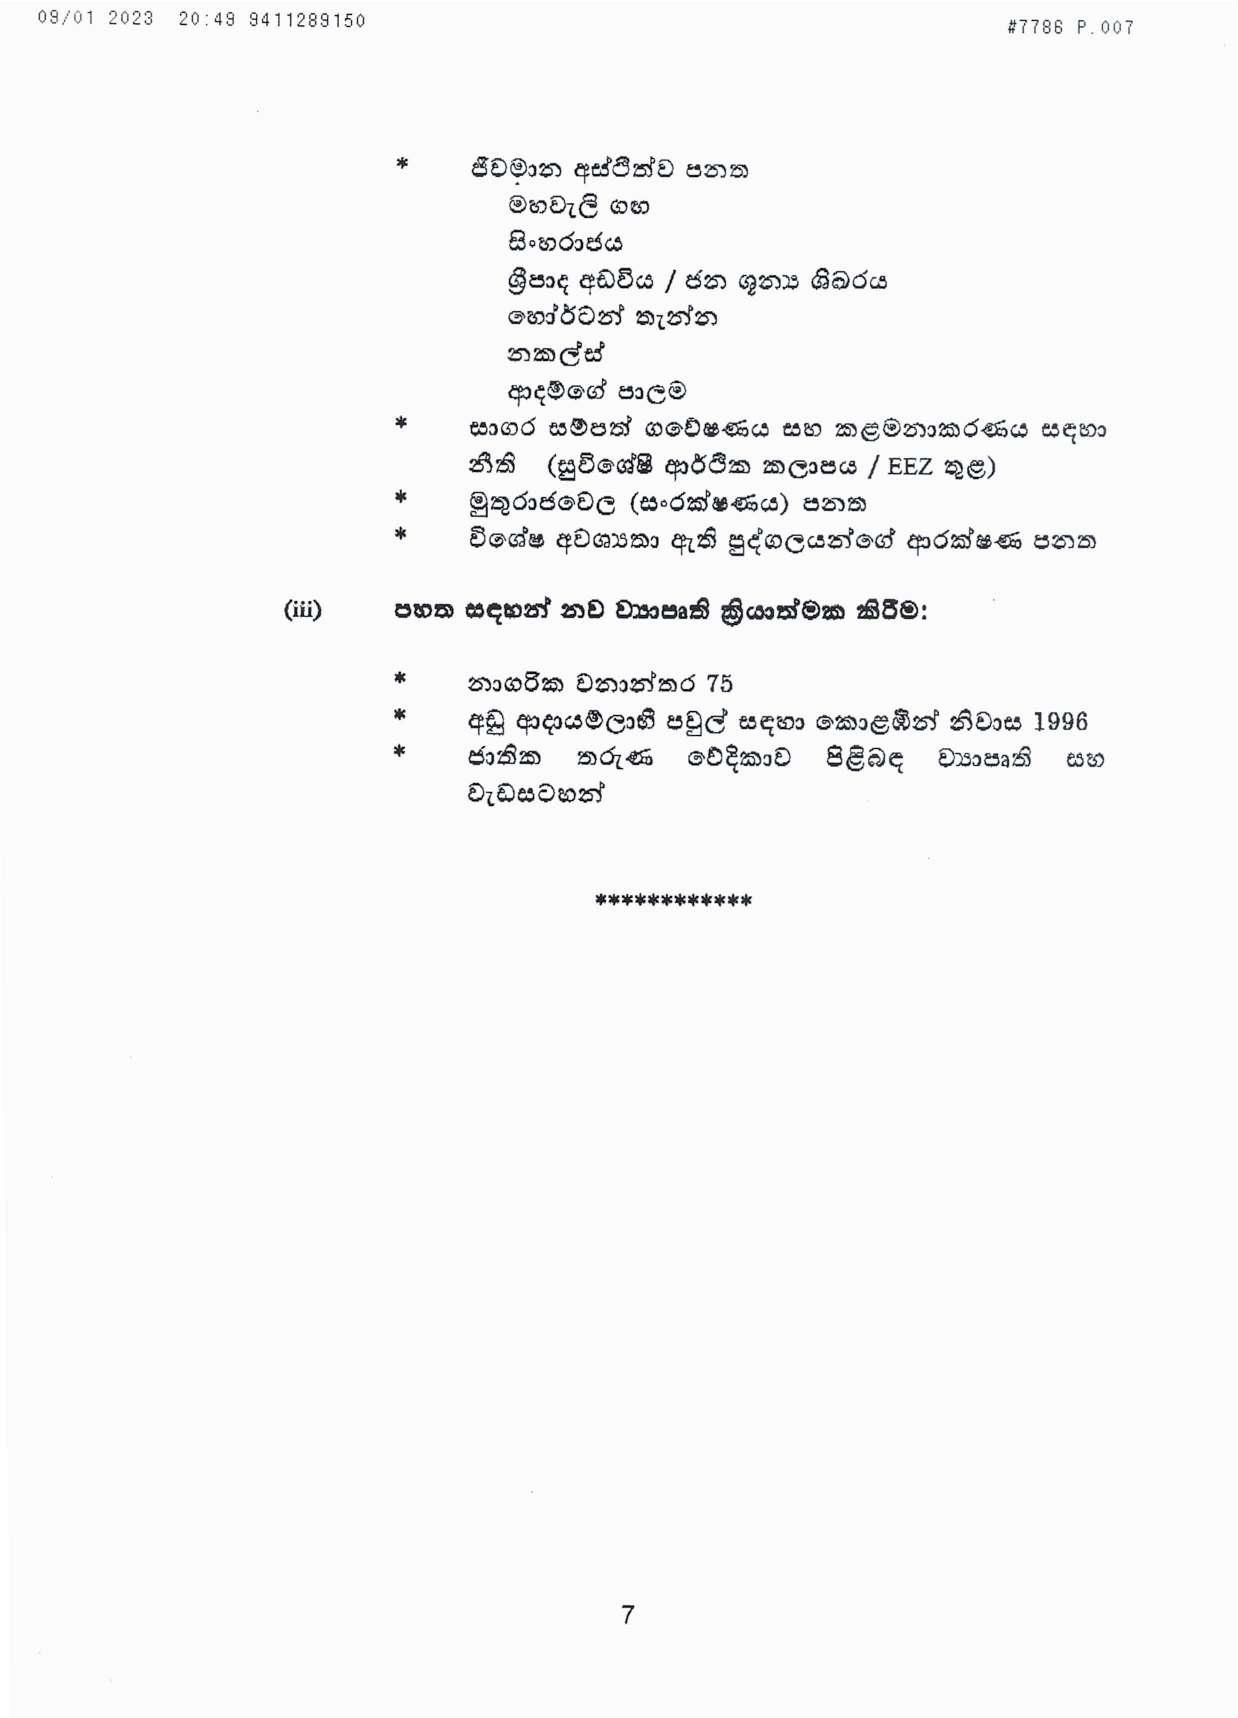 Cabinet Decision on 09.01.2023 page 007